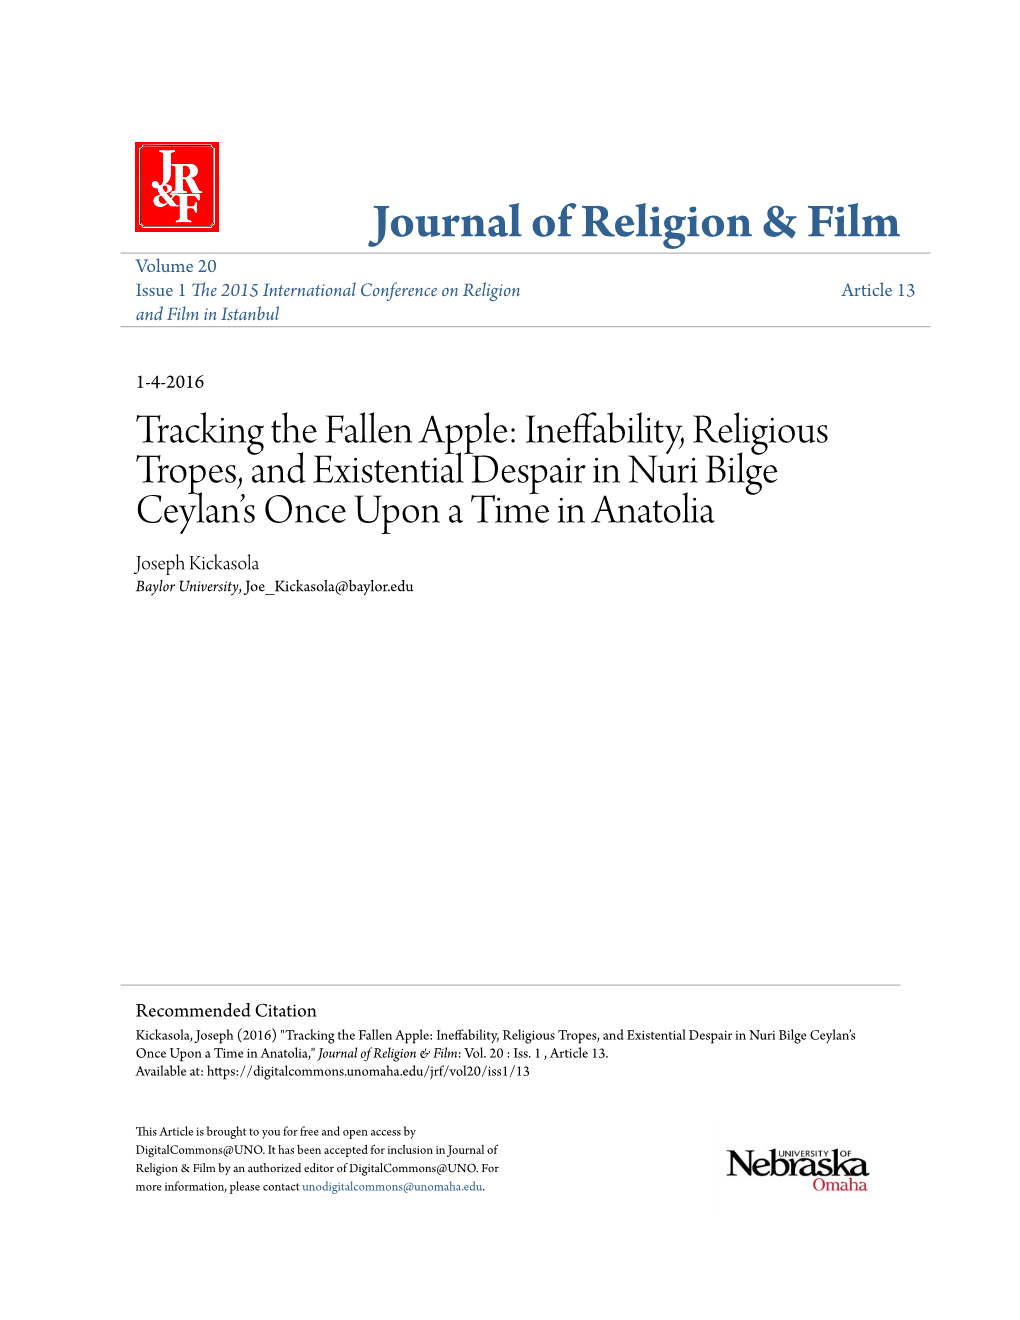 Ineffability, Religious Tropes, and Existential Despair in Nuri Bilge Ceylanâ•Žs Once Upon A